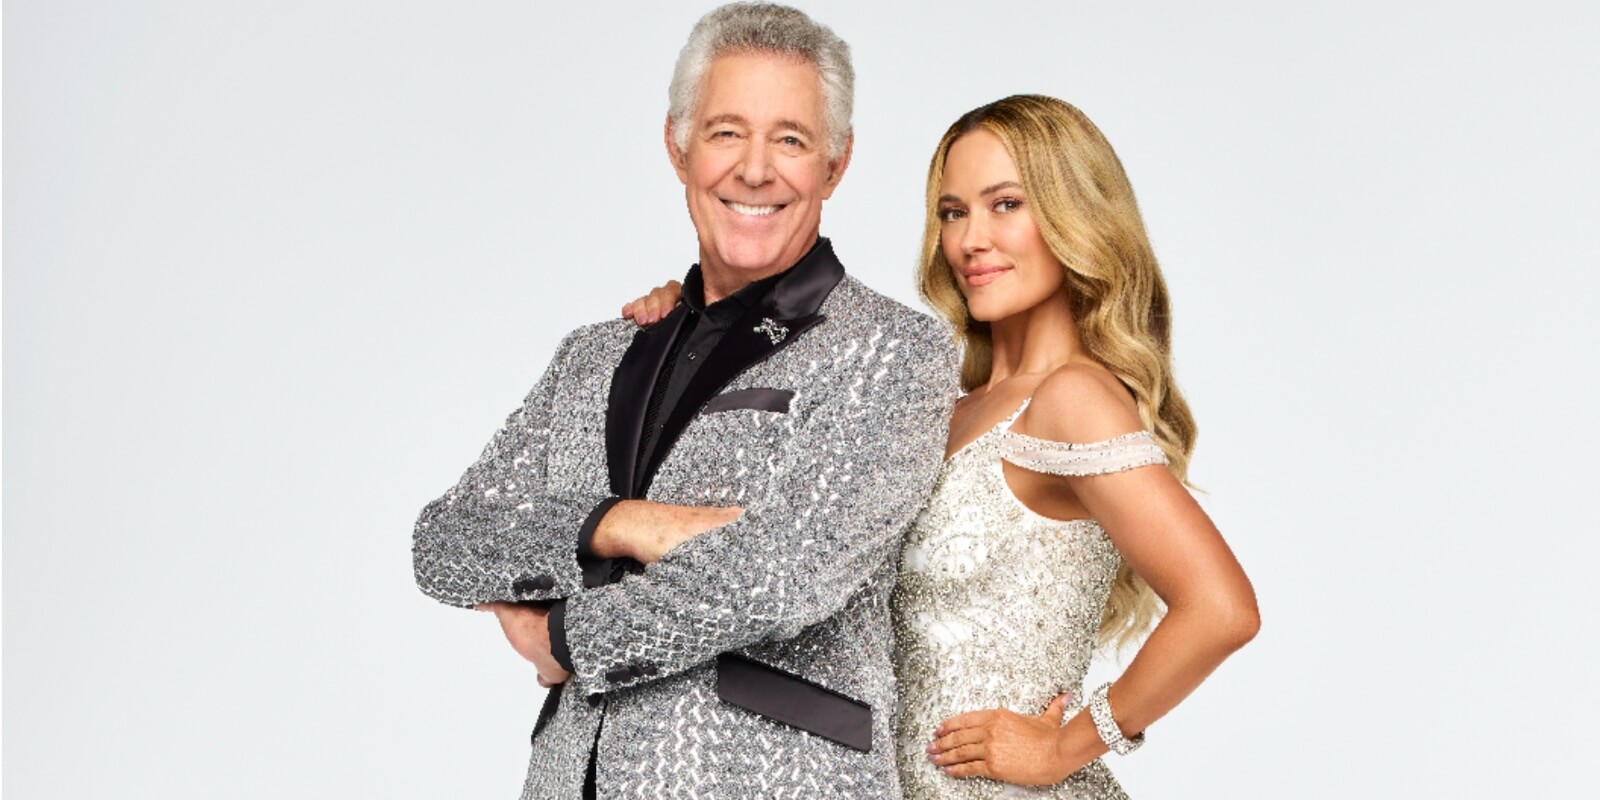 Former 'Brady Bunch' star Barry Williams will dance with pro Peta Murgatroyd on season 32 of 'Dancing With the Stars.'